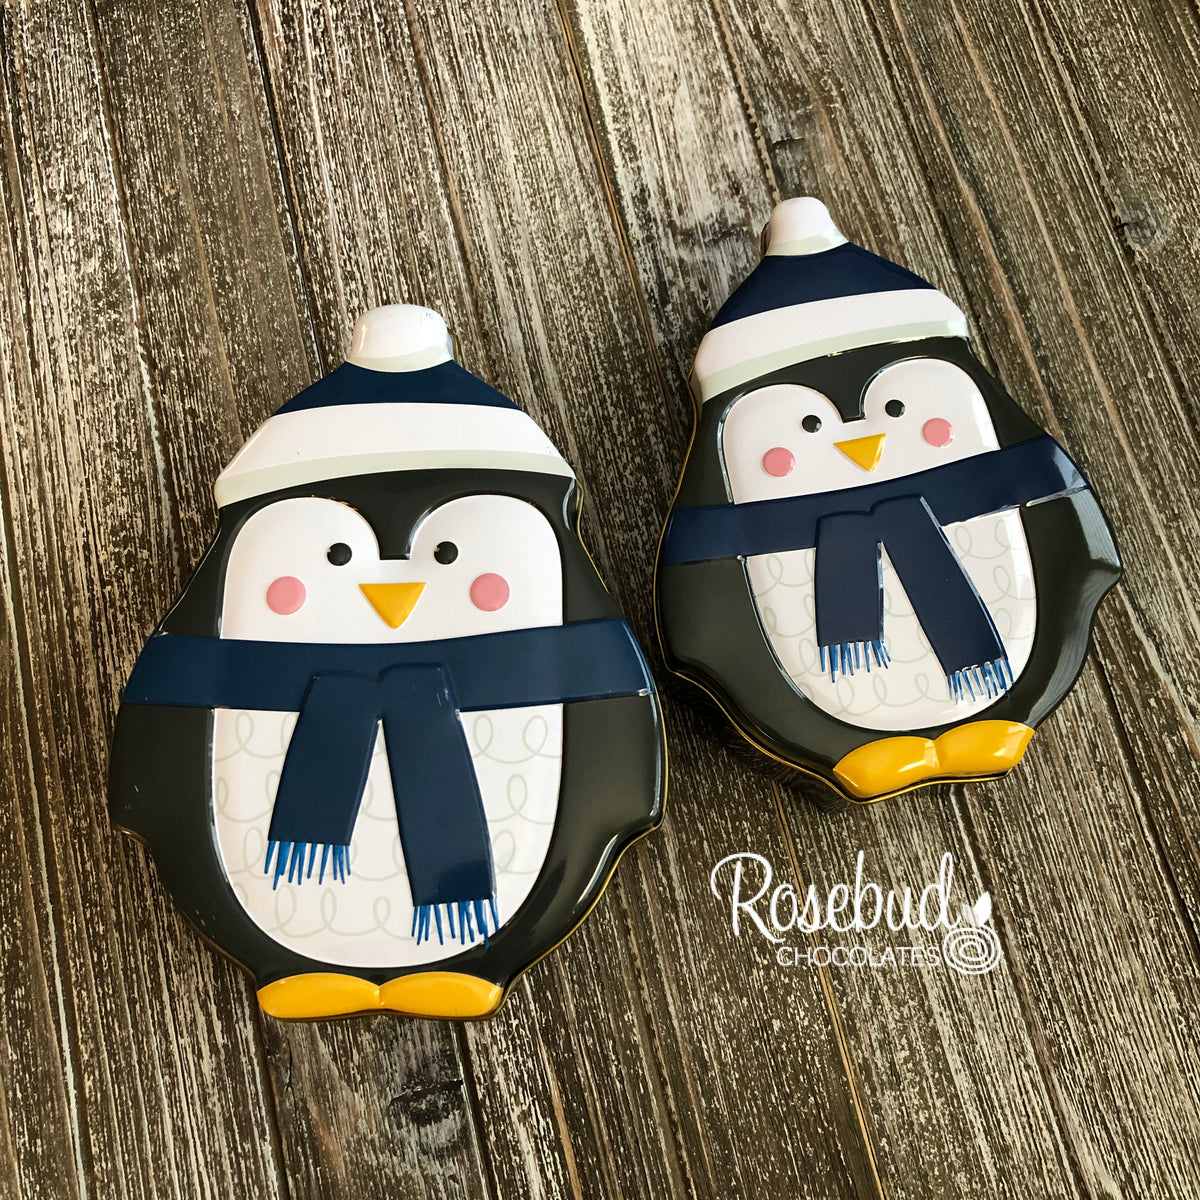 2 PENGUIN TINS with 10 Individually Sealed Chocolate Covered Oreo Cook ...